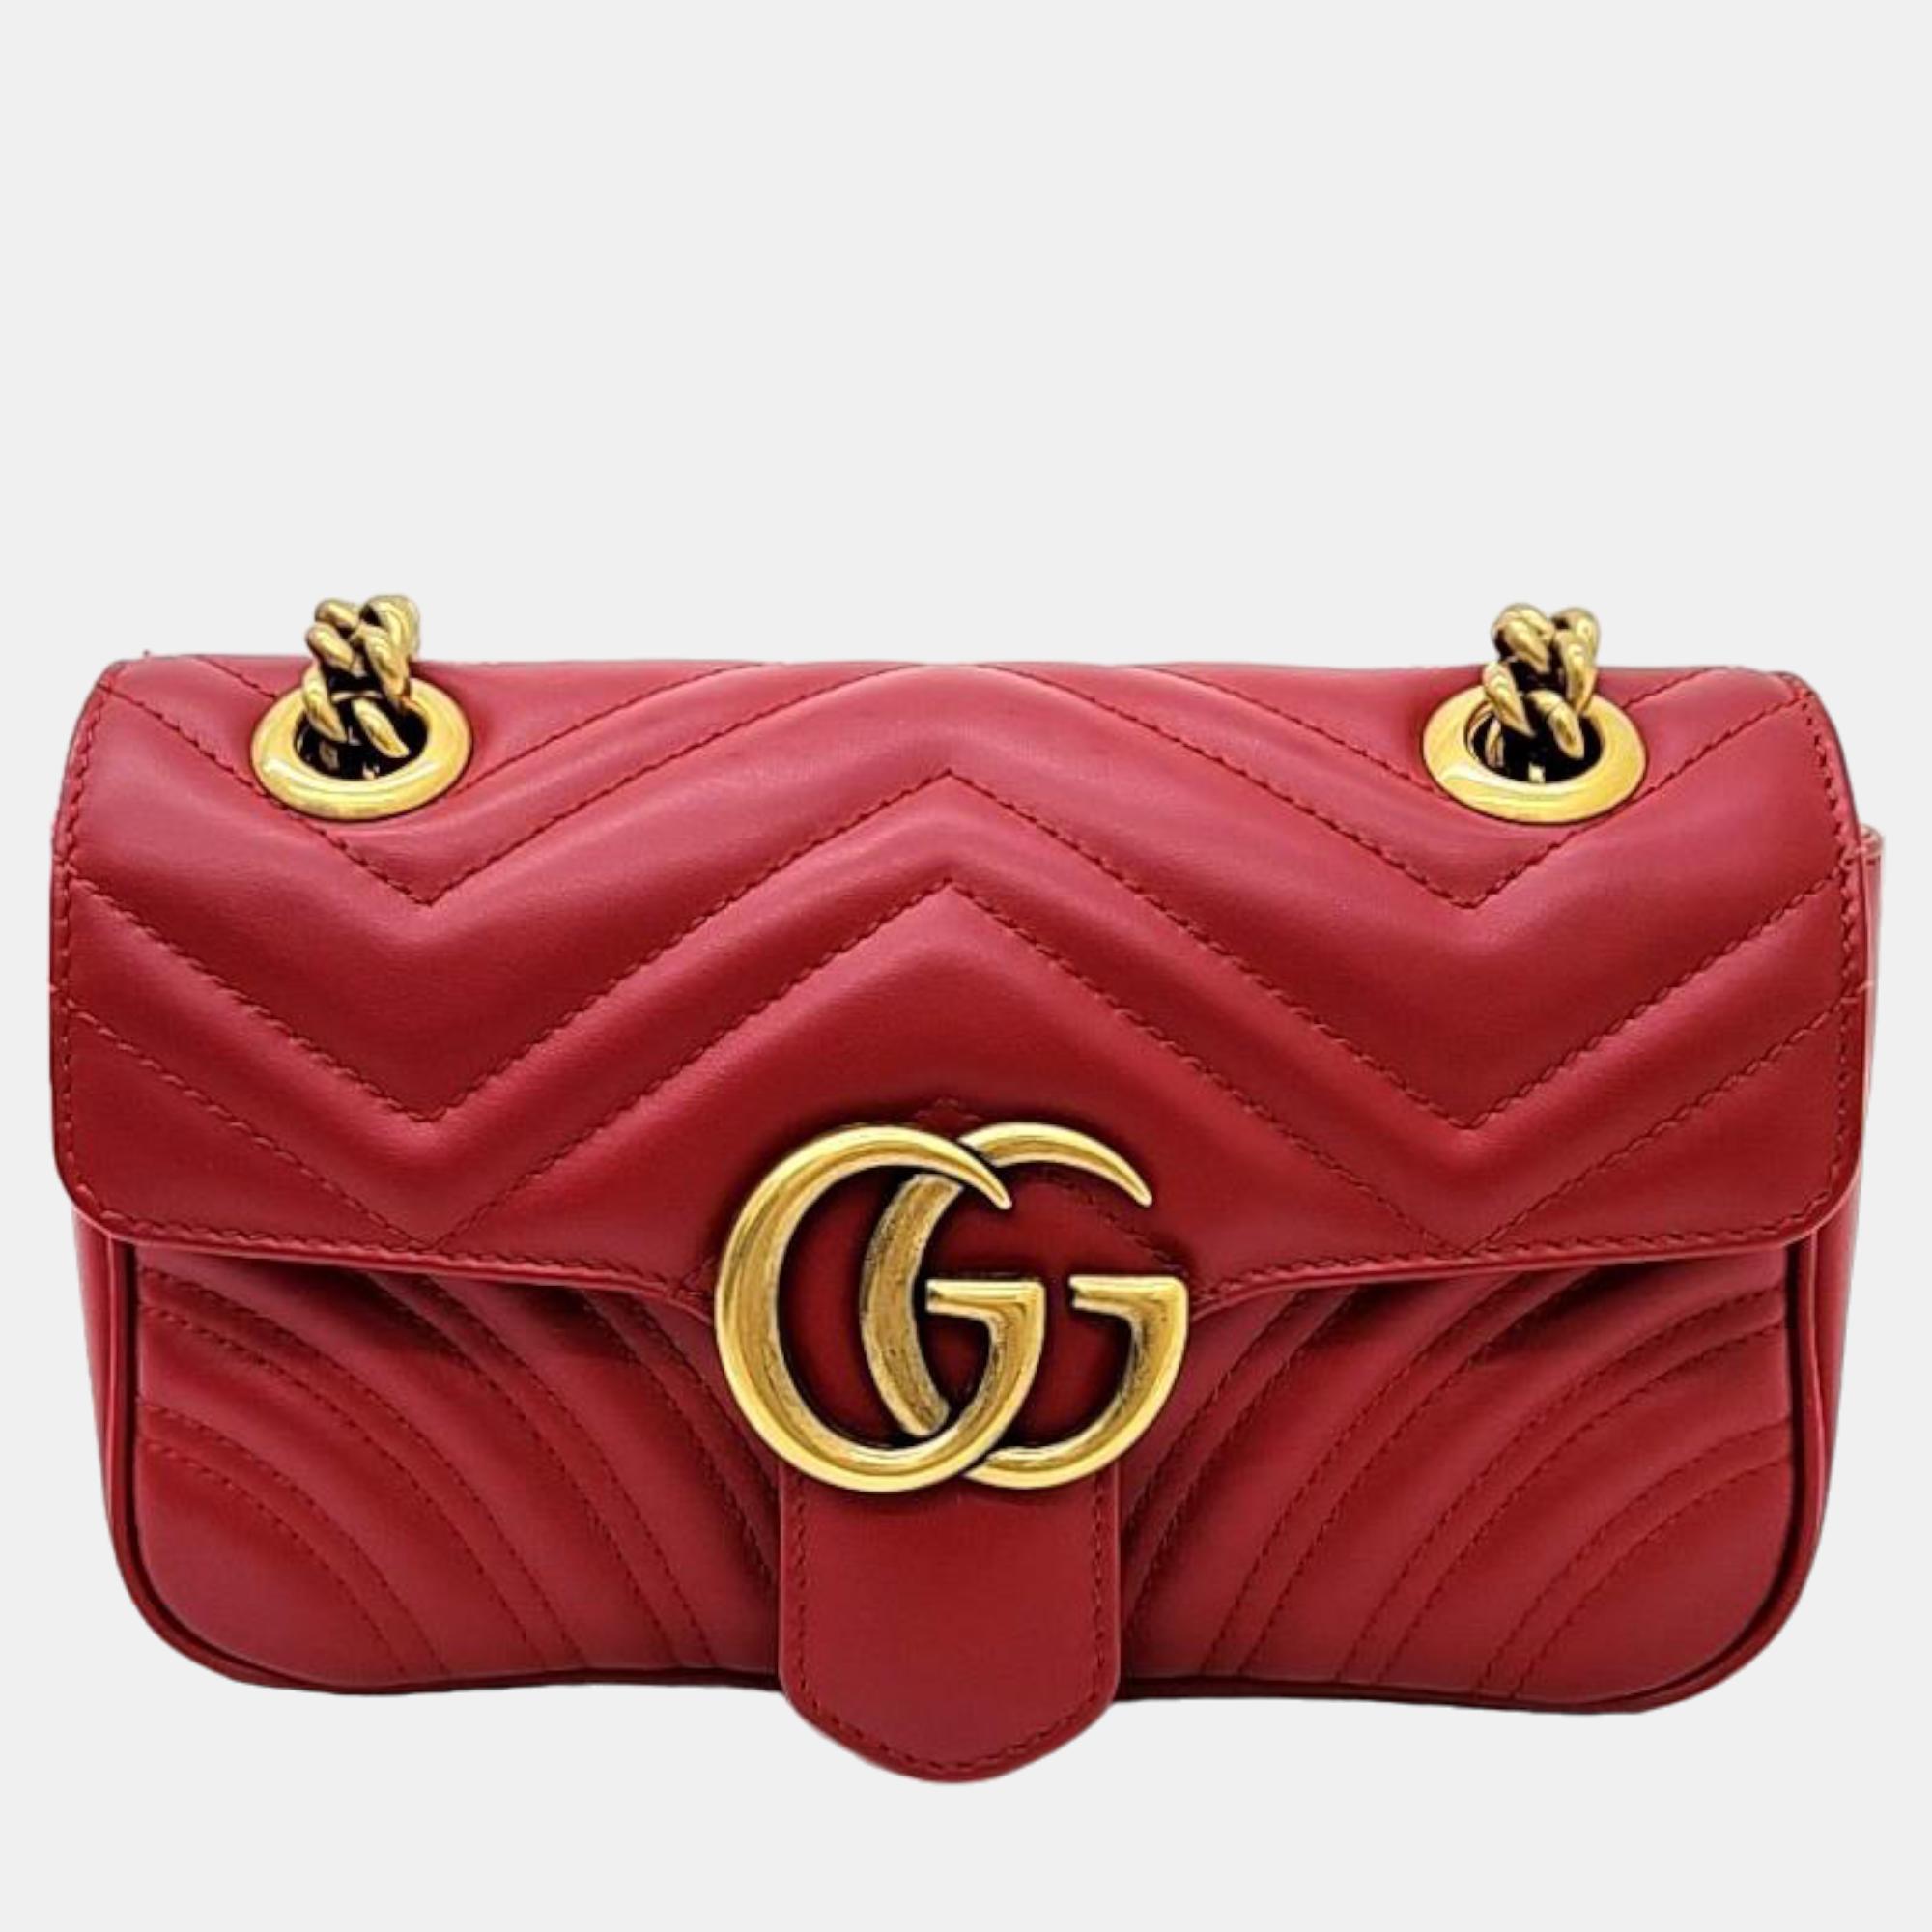 Pre-owned Gucci Red Leather Gg Marmont Bag